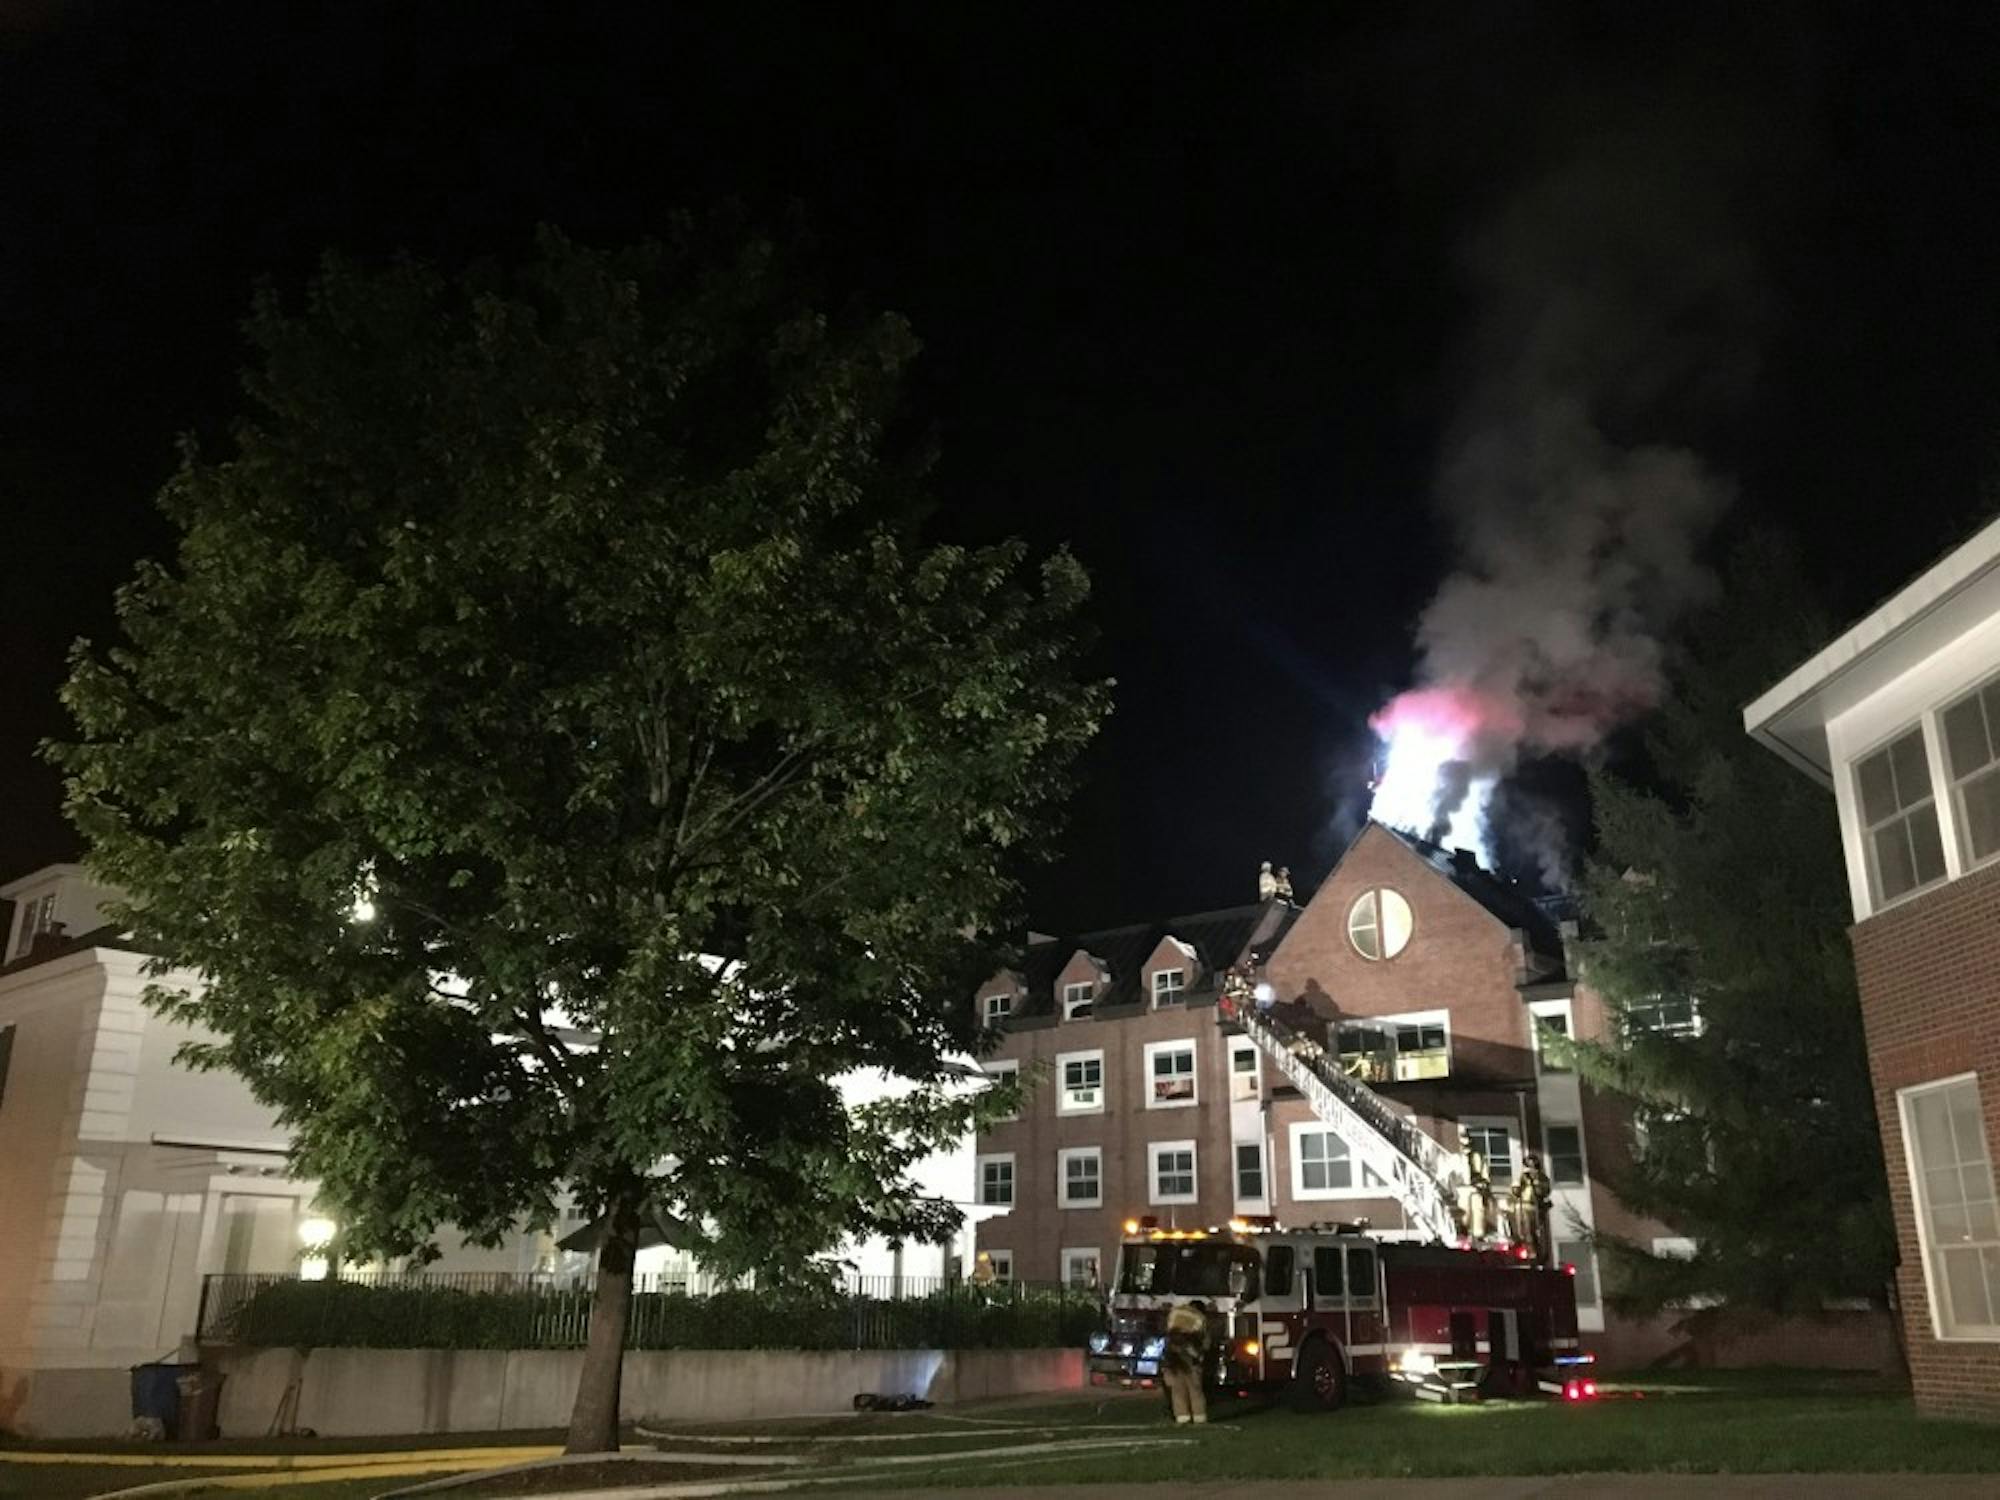 Morton Hall is currently uninhabitable as a result of extensive smoke and water damage caused by a four-alarm fire that started at 12:05 a.m.&nbsp;